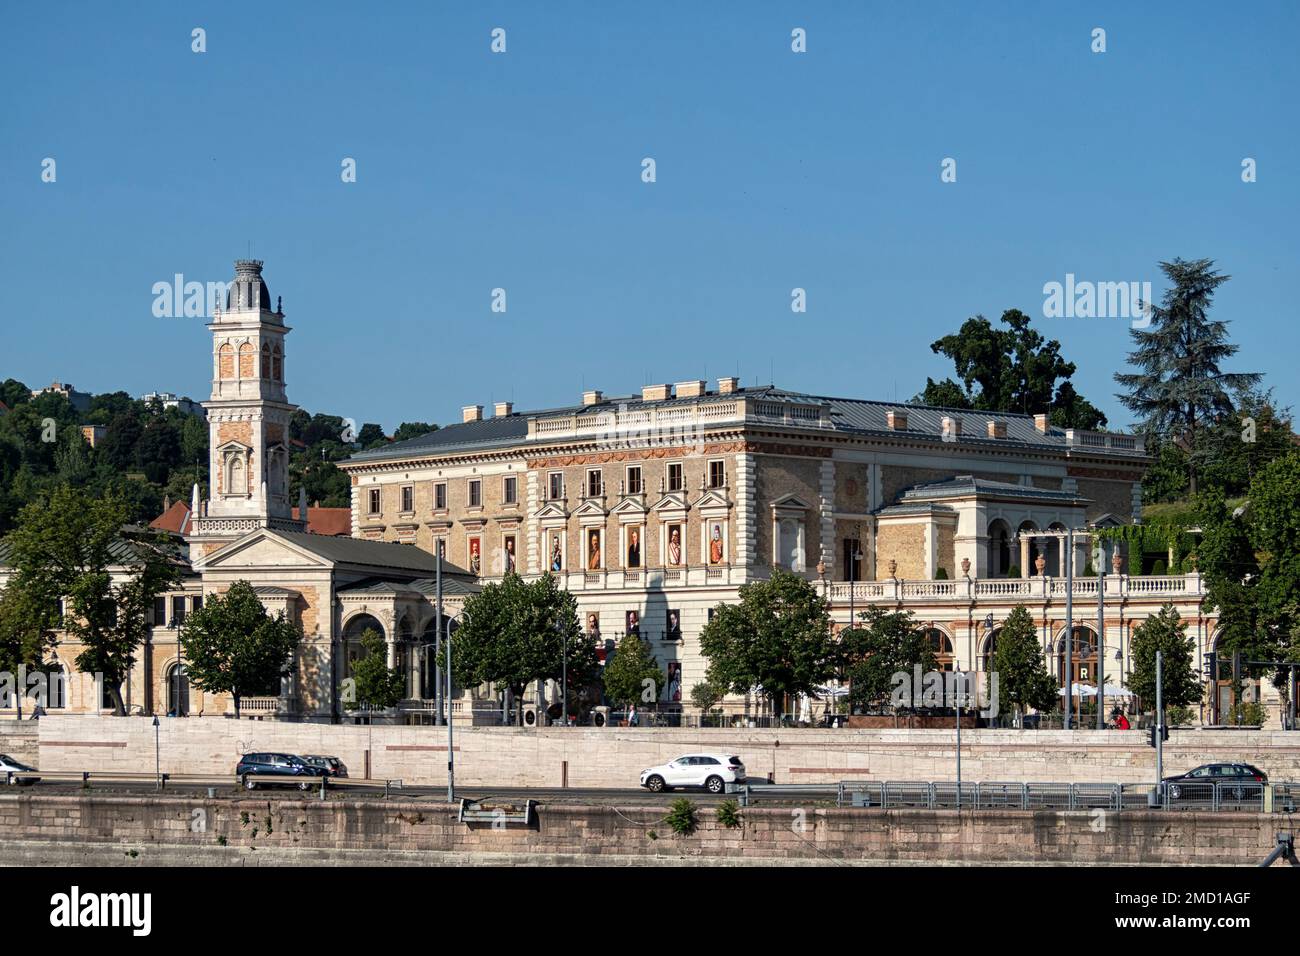 BUDAPEST, HUNGARY - JULY 16, 2019:  Exterior view of the Varkert Palace Stock Photo